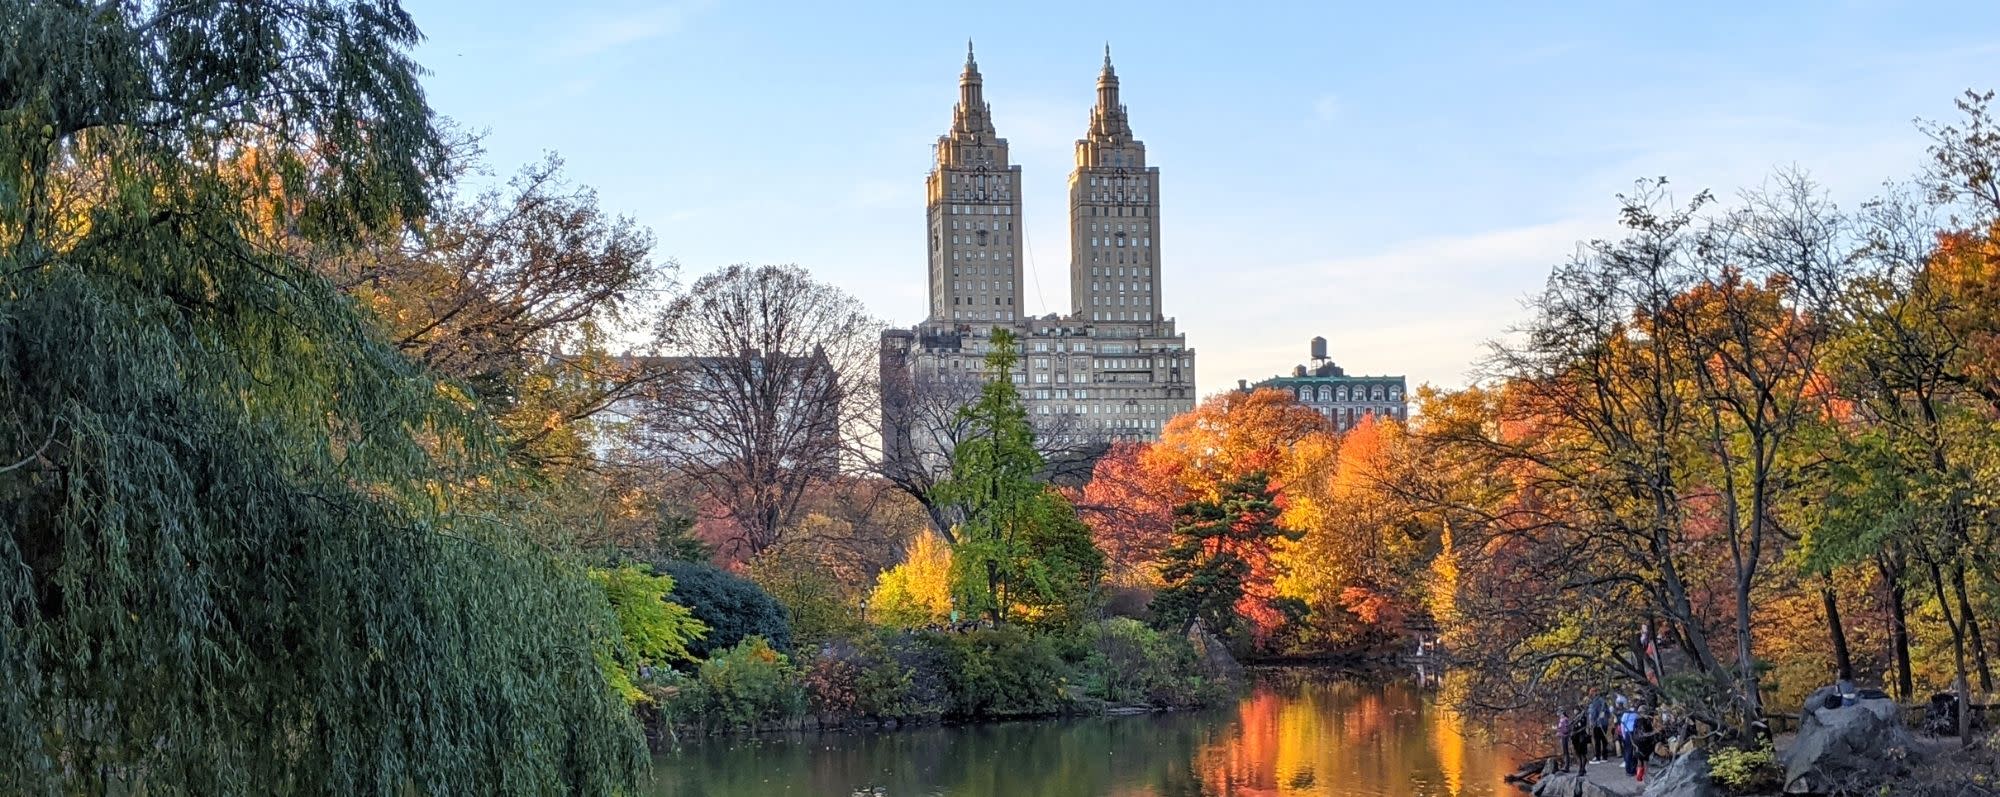 A view of fall foliage and buildings from within Central Park